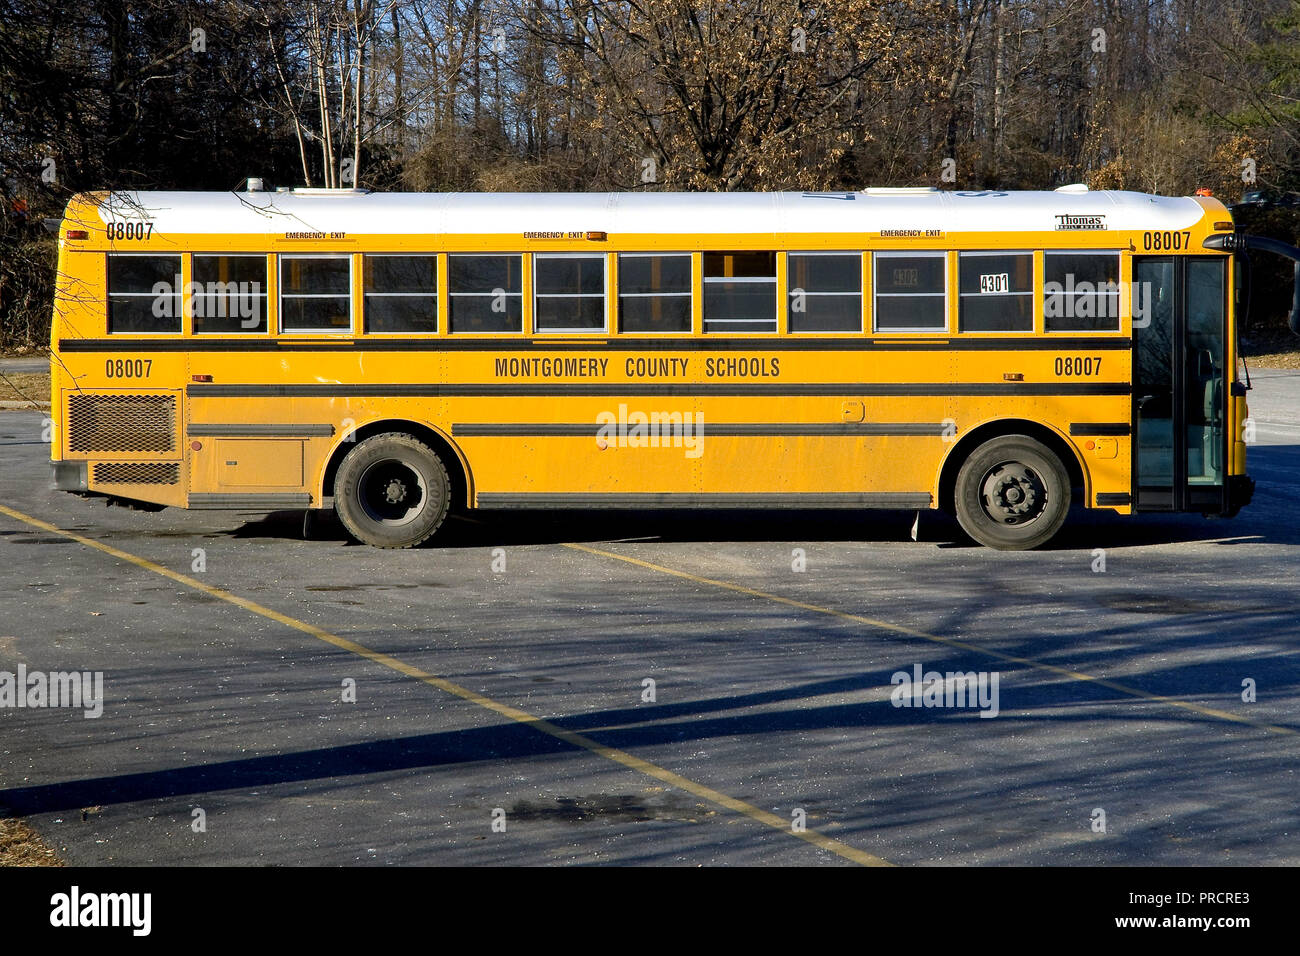 Students in Montgomery County, Maryland enjoy cleaner air made possible by Diesel Particulate Filters (DPF) installed on busses in the school district. Grants from EPA will allow Montgomery County Public Schools to continue retrofitting busses with DPFs. Stock Photo